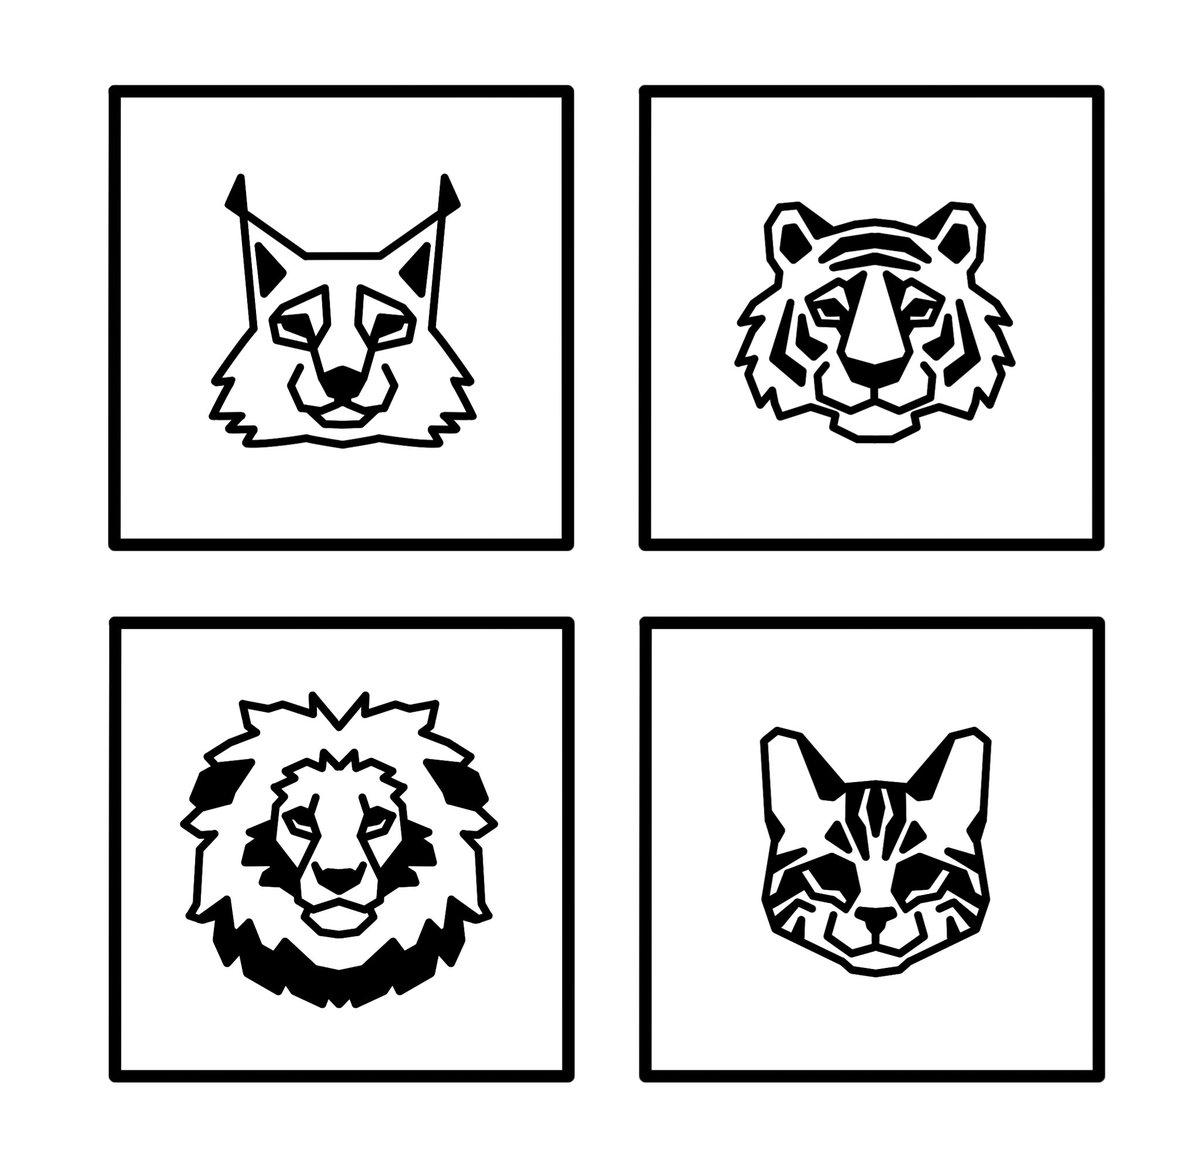 Guys do those icons I drew look like pictograms? I had to create 4 for tomorrow's class. I feel like the lynx looks the most goofy, compared to the others x) 